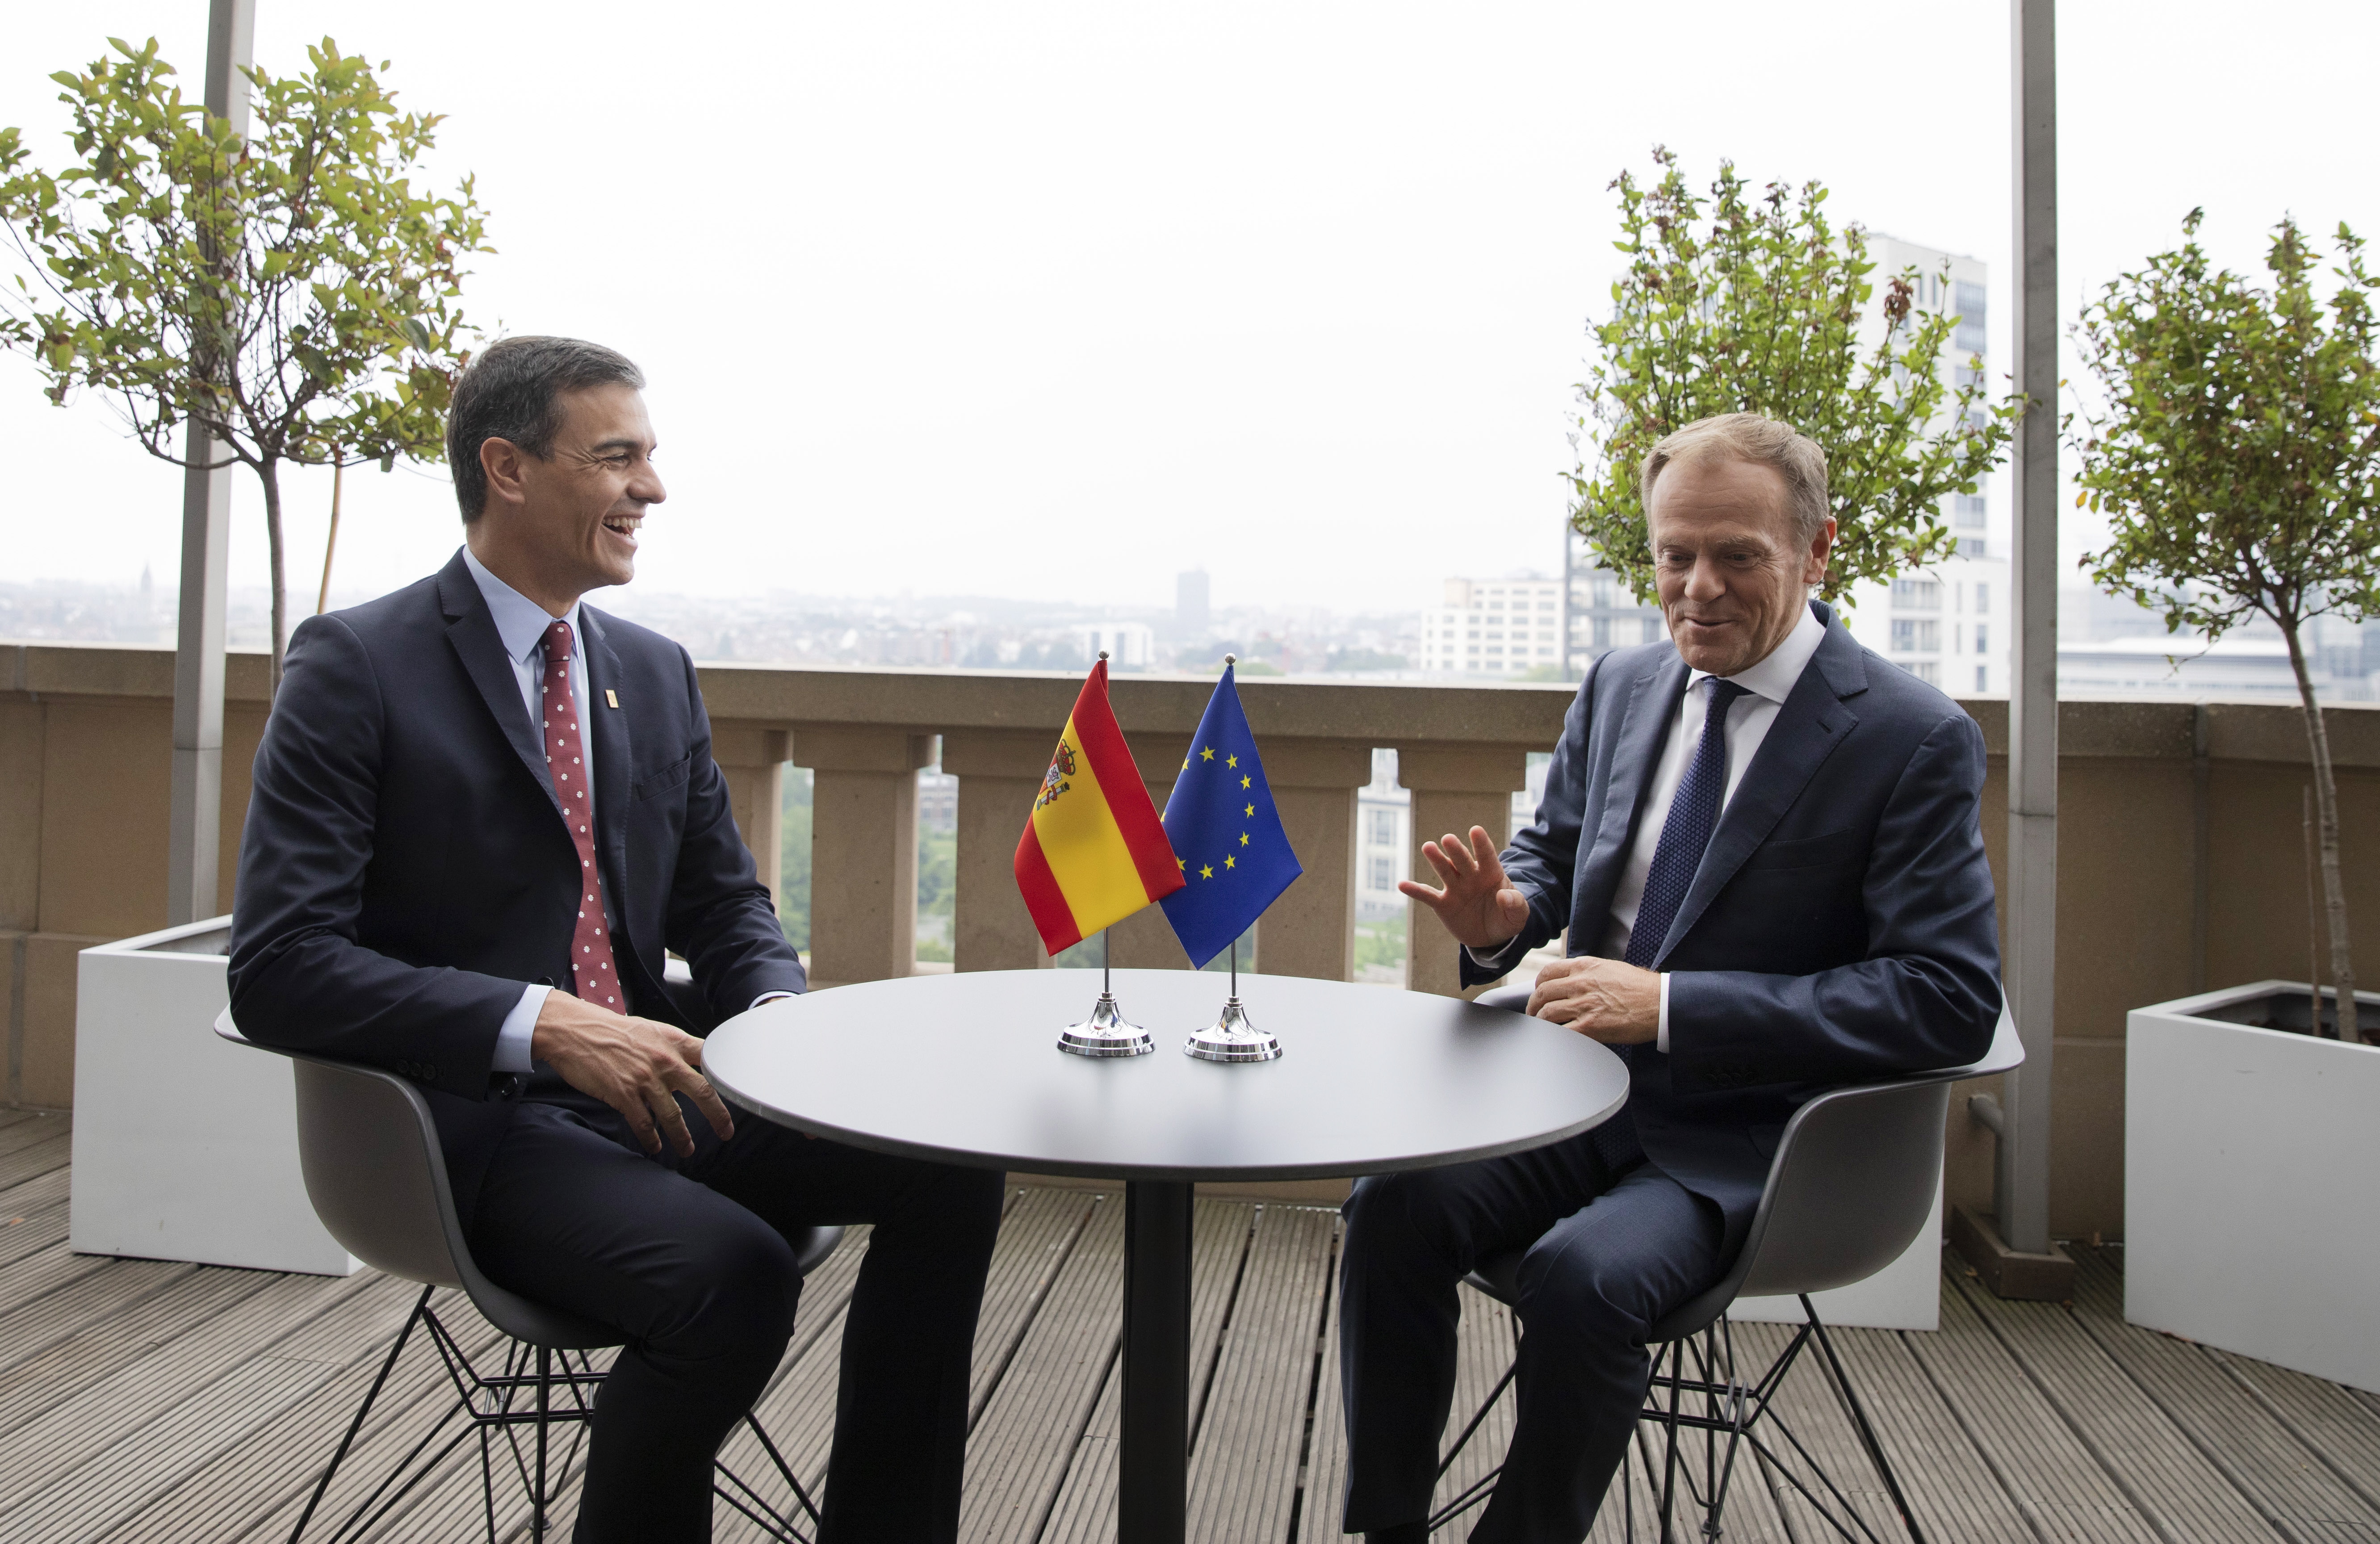 epa07684102 Spanish Prime Minister Pedro Sanchez (L) meets with European Council President Donald Tusk on the sidelines of a Special European Council in Brussels, Belgium, 30 June 2019. Heads of states or governments from EU member states meet to continue discussions on the possible candidates for the heads of EU institutions, namely European Council President, President of the European Commission, High Representative of the Union for Foreign Affairs and Security Policy (Foreign Policy Chief), and President of the European Central Bank.  EPA/VIRGINIA MAYO / POOL